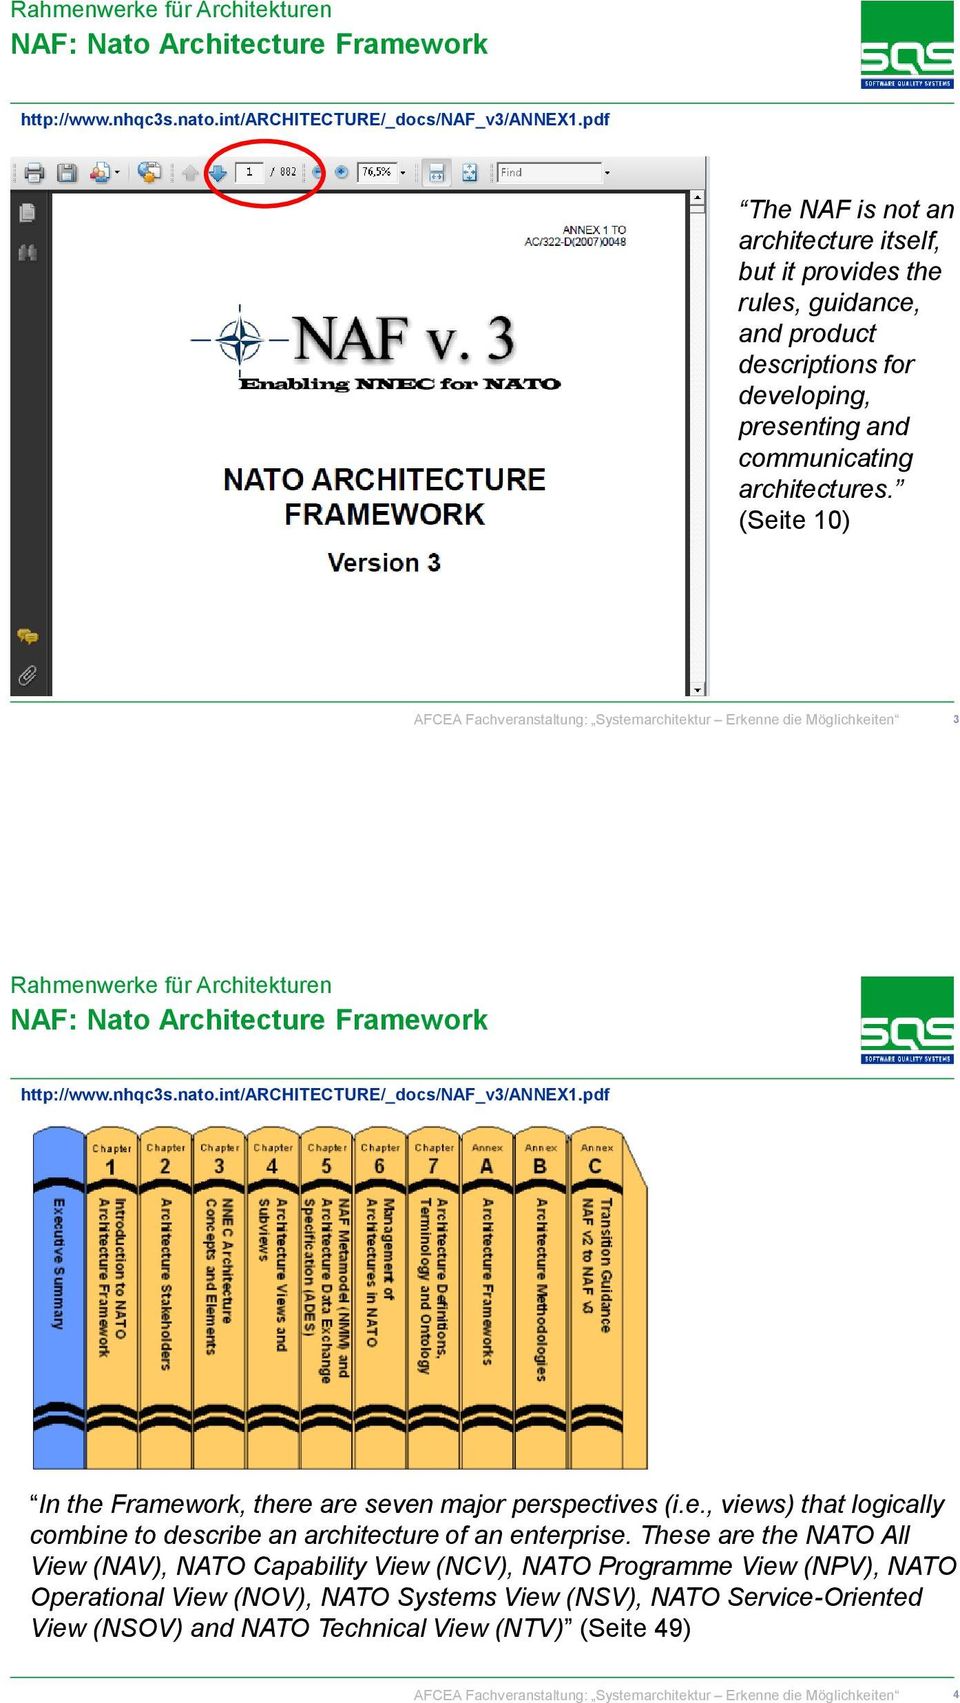 (Seite 10) 3 pdf In the Framework, there are seven major perspectives (i.e., views) that logically combine to describe an architecture of an enterprise.